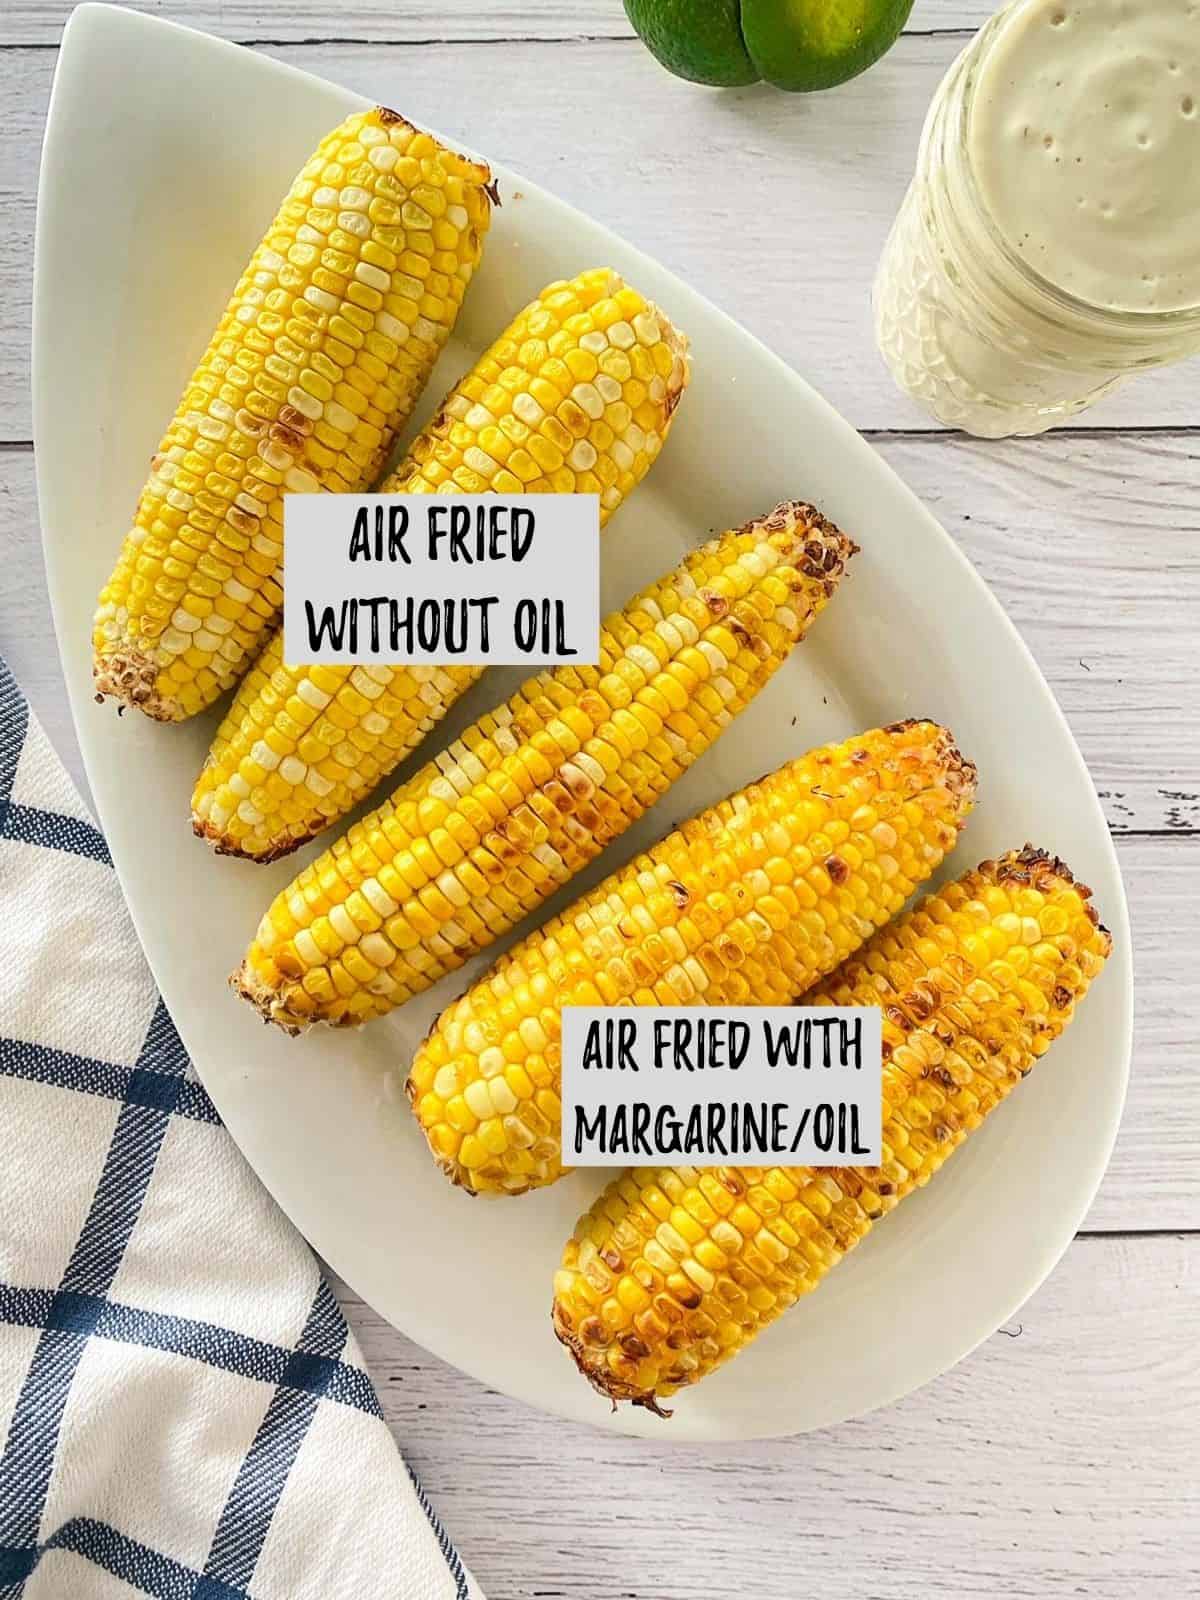 Platter with 5 corn on the cob on it with labels indicated which were made without oil vs. with oil.